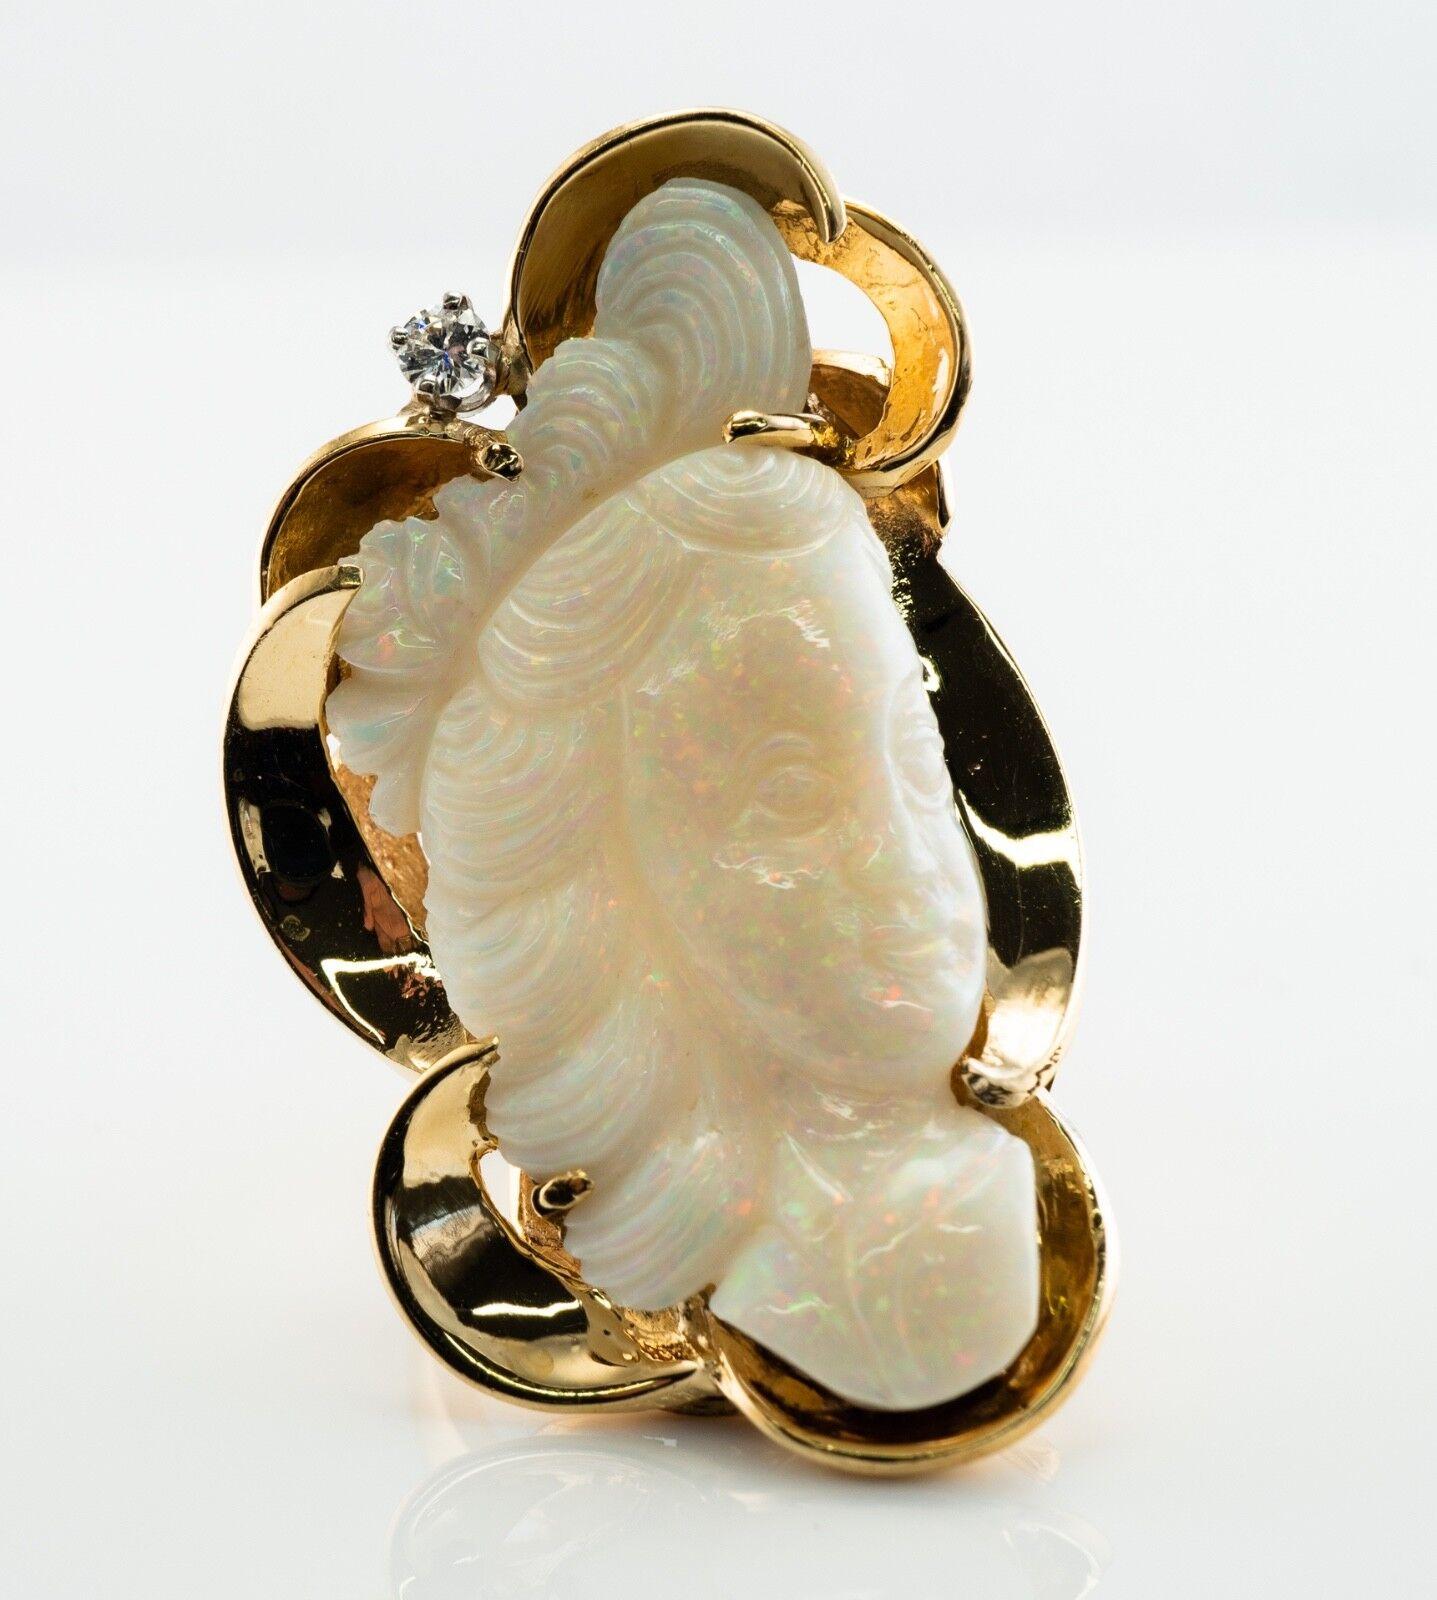 This gorgeous vintage ring is finely crafted in solid 14K Yellow Gold and set with natural carved Opal cameo and diamond. The lovely crystal Opal profile measures 1.5